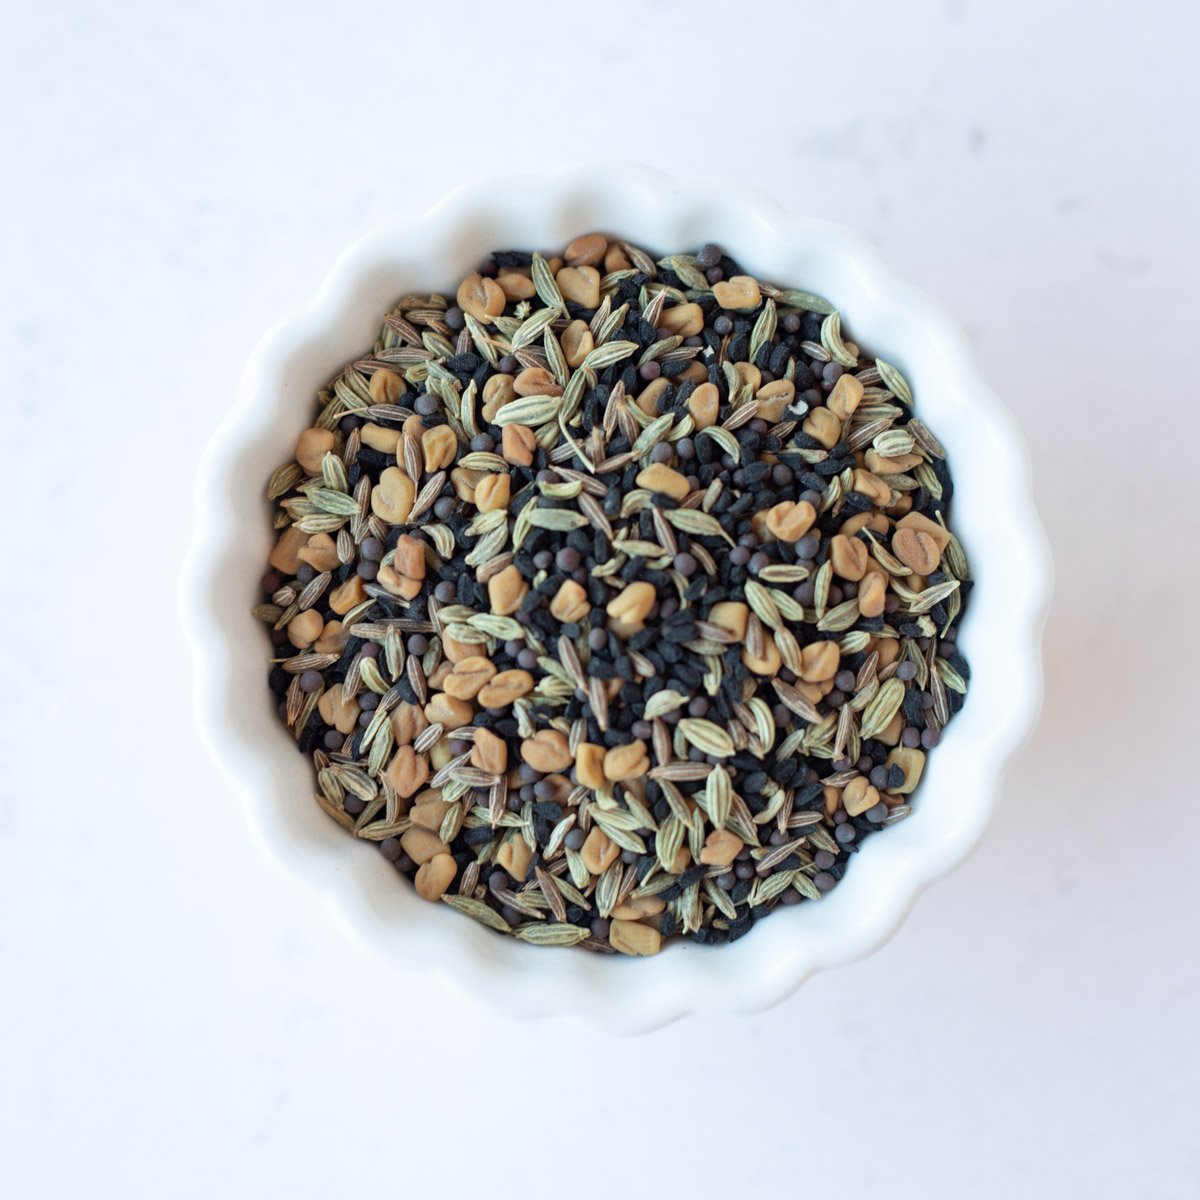 panch phoran spice mix in a white bowl